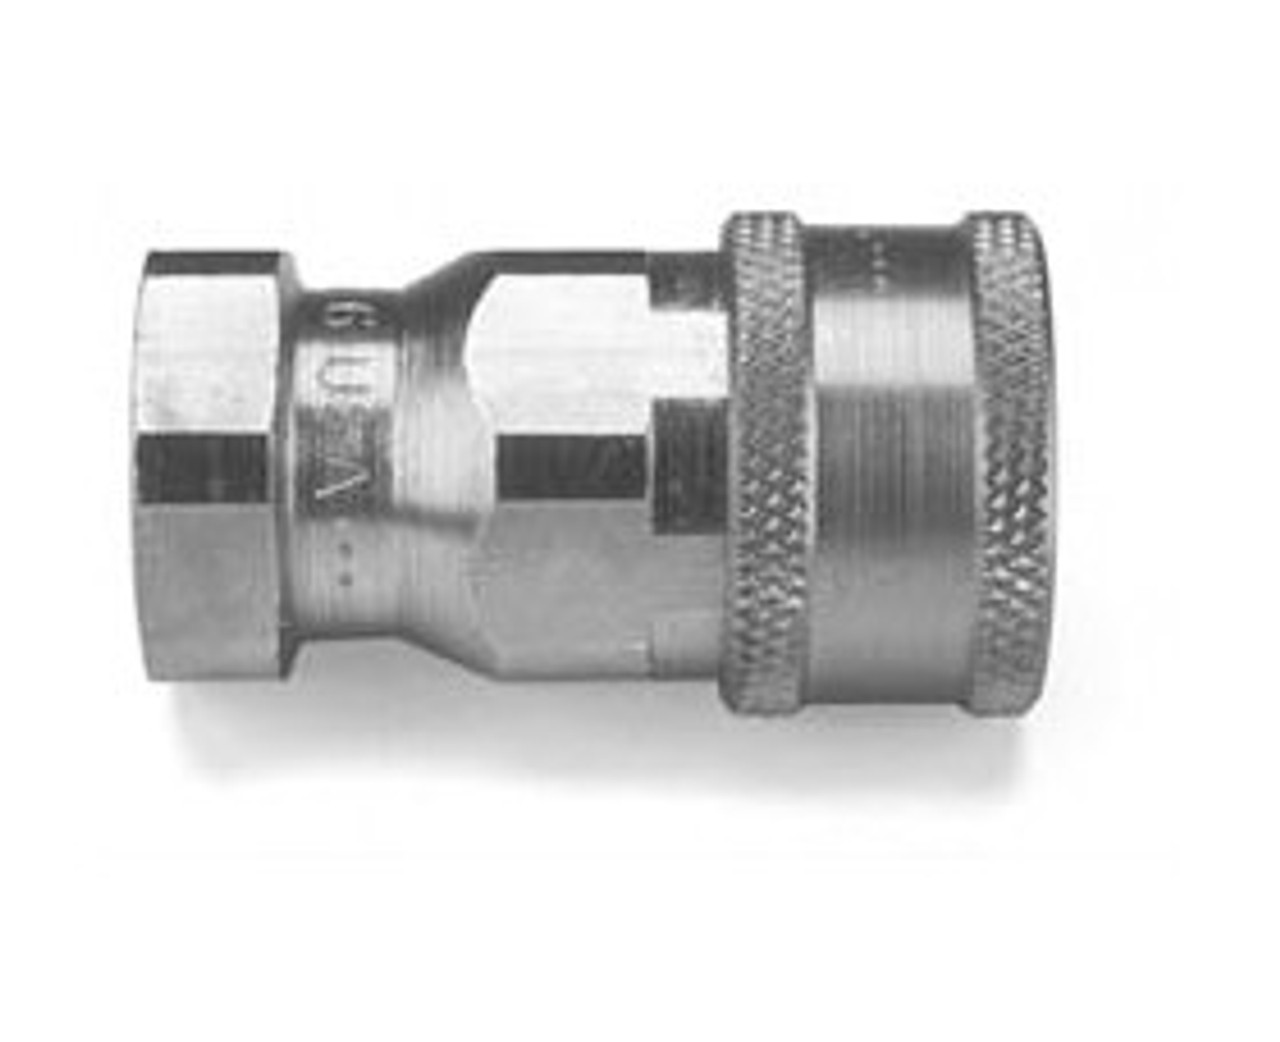 Parker 1719785 6600 Series Coupler Steel 1/2" Body Size #8 Sae (3/4-16 Orb) Female Port Poppet-Type Valve General Purpose 4000Psi (276Bar) Nitrile Seals Temp Range Degrees F: (-40 To +250) Conforms To Iso 7241 Series A Standards